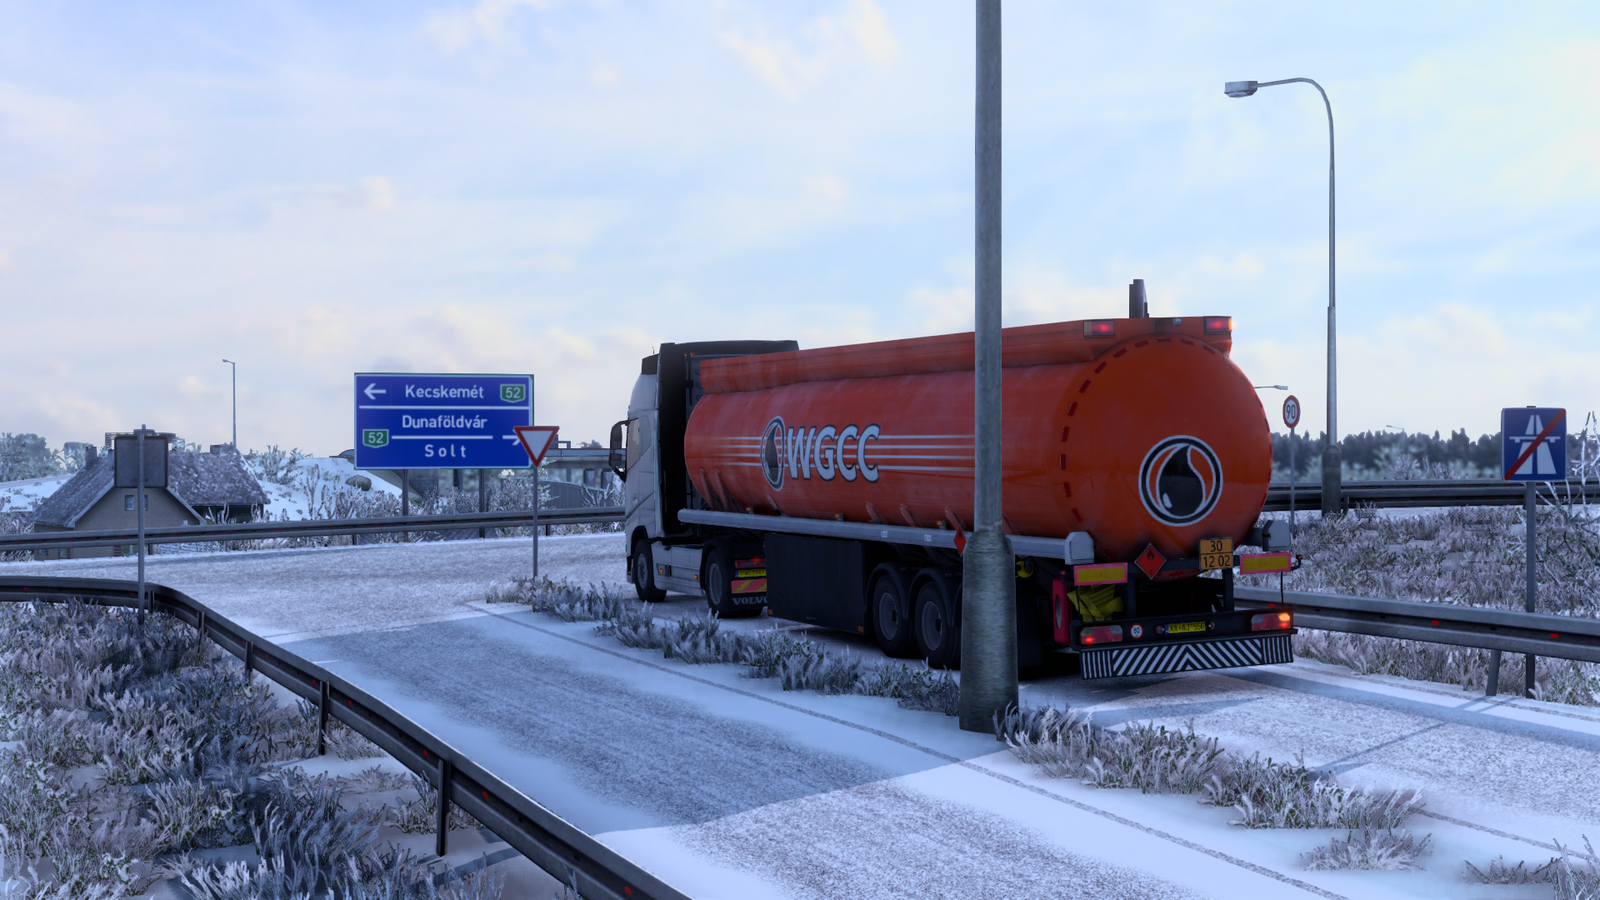 ets2_20221215_104426_00.png